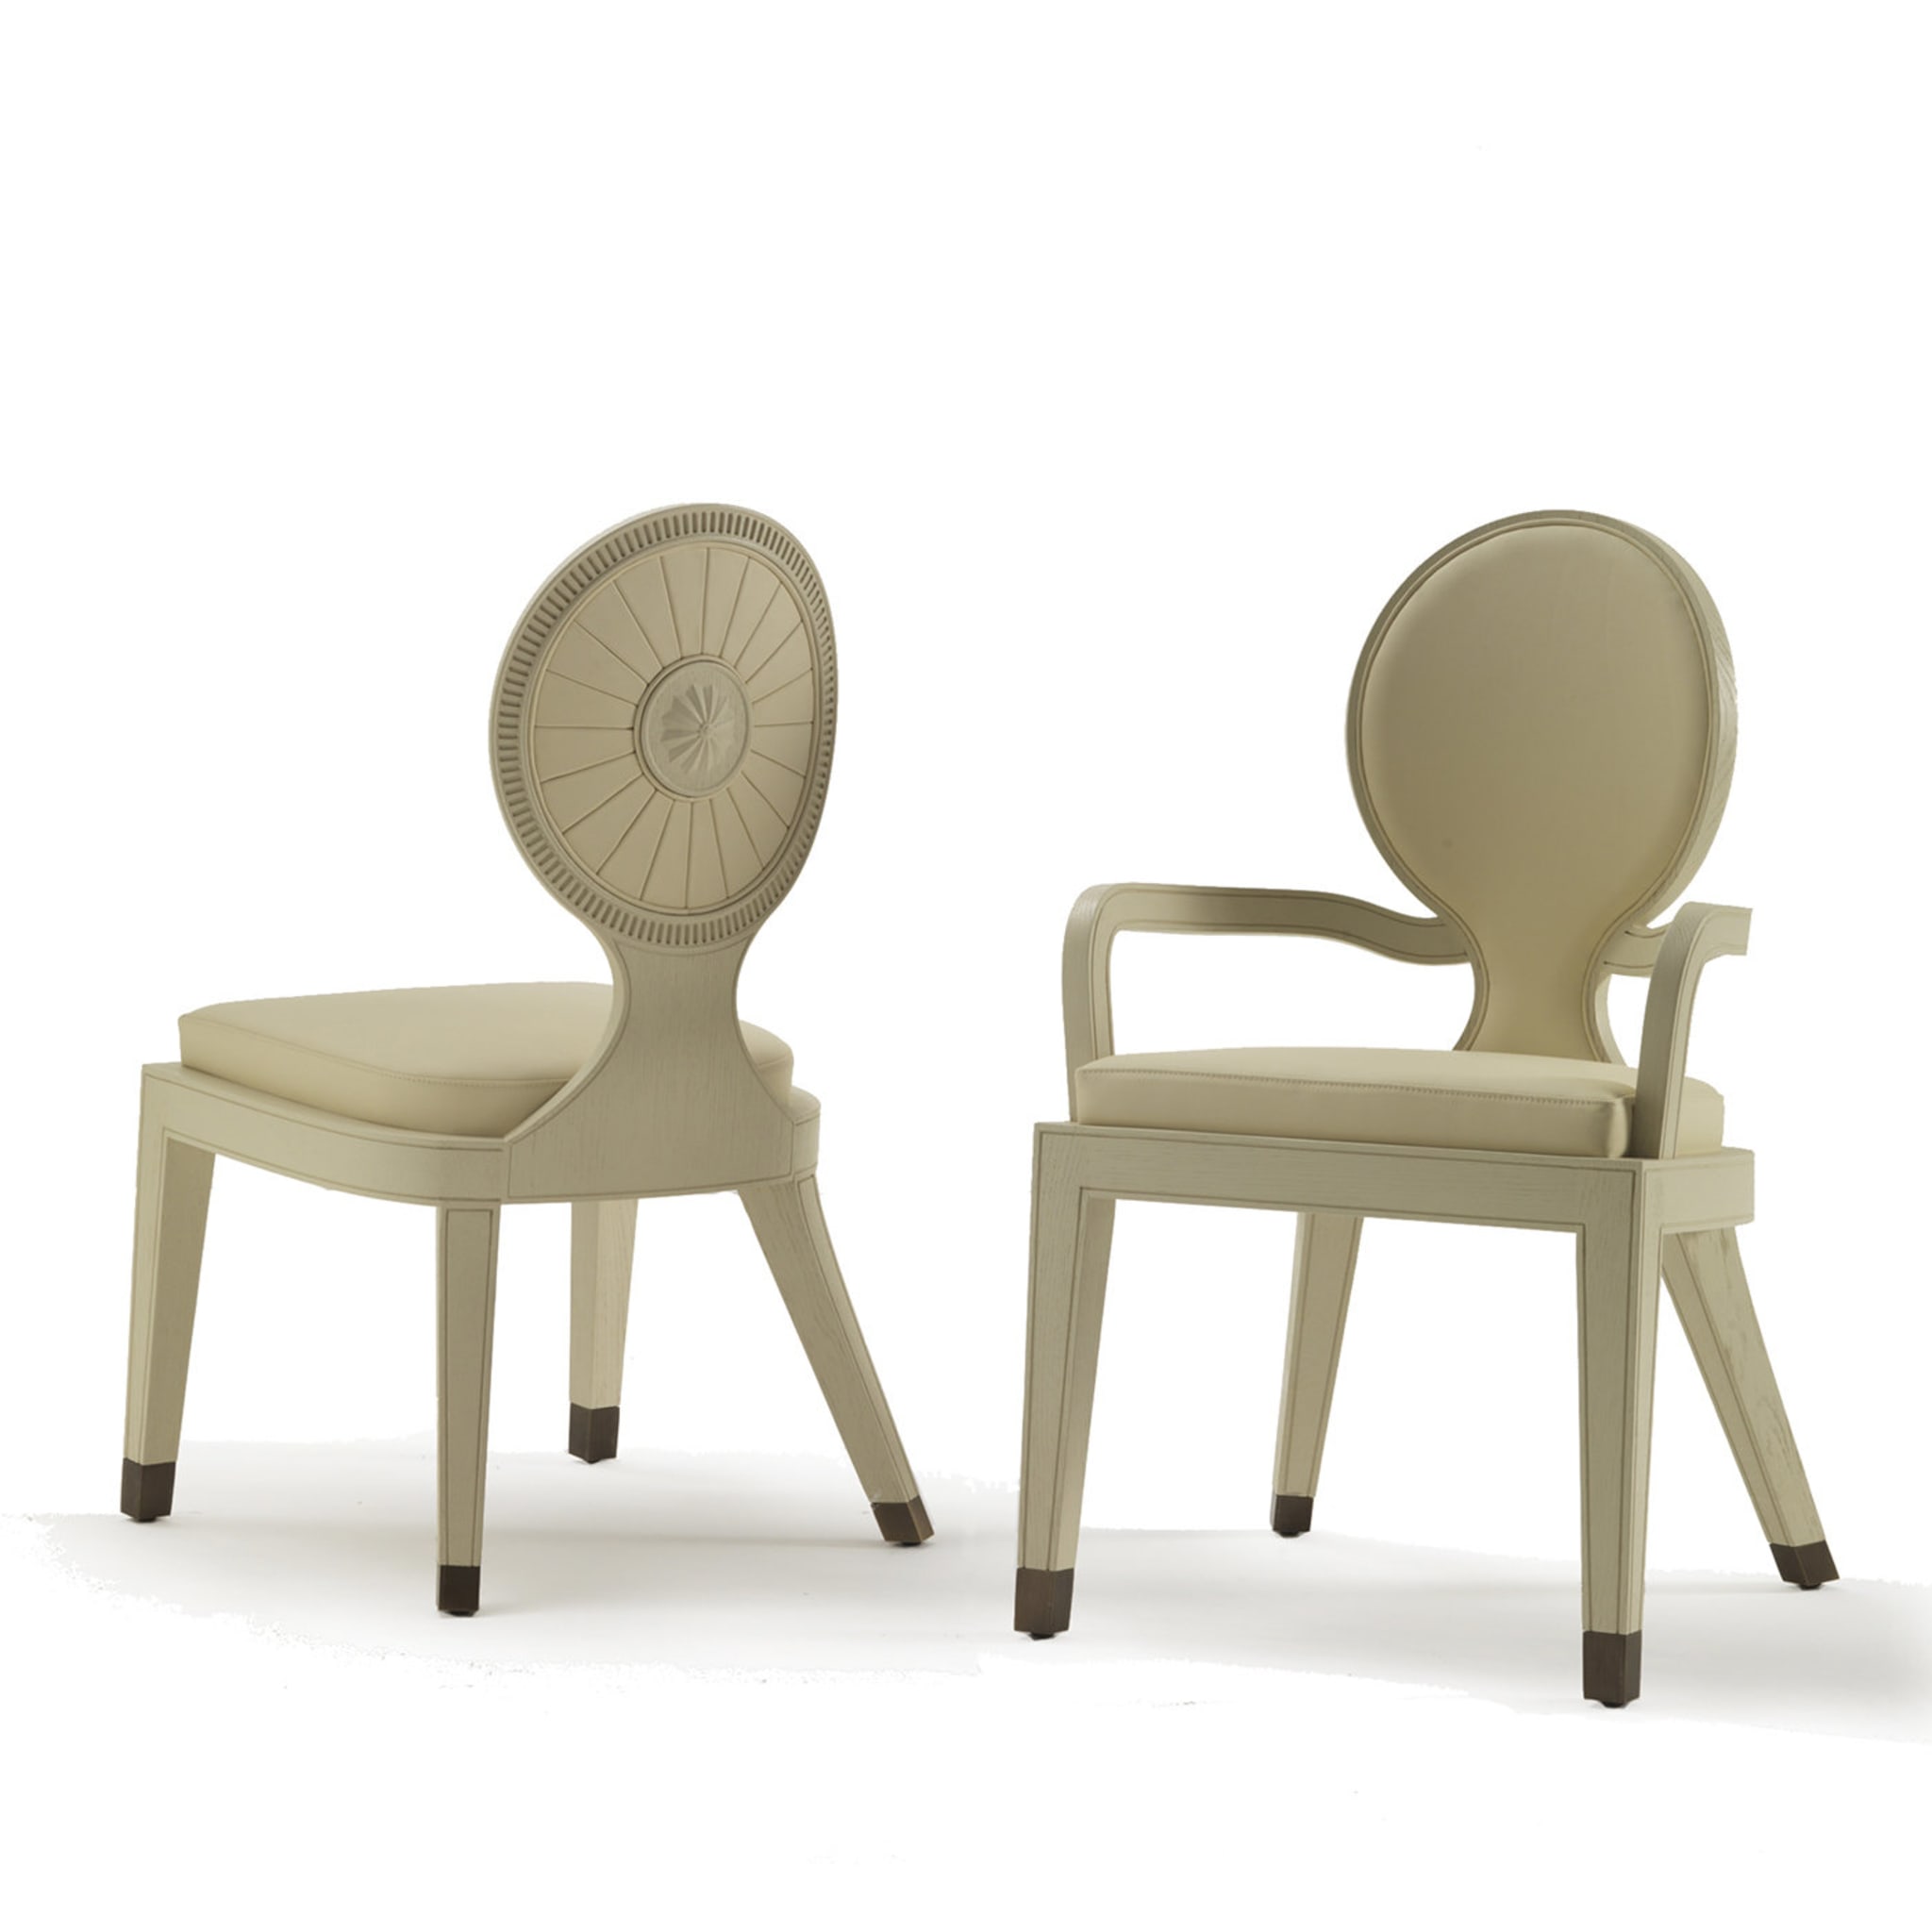 Moon & Sun Chair with Armrests by Archer Humphryes Architects - Alternative view 1